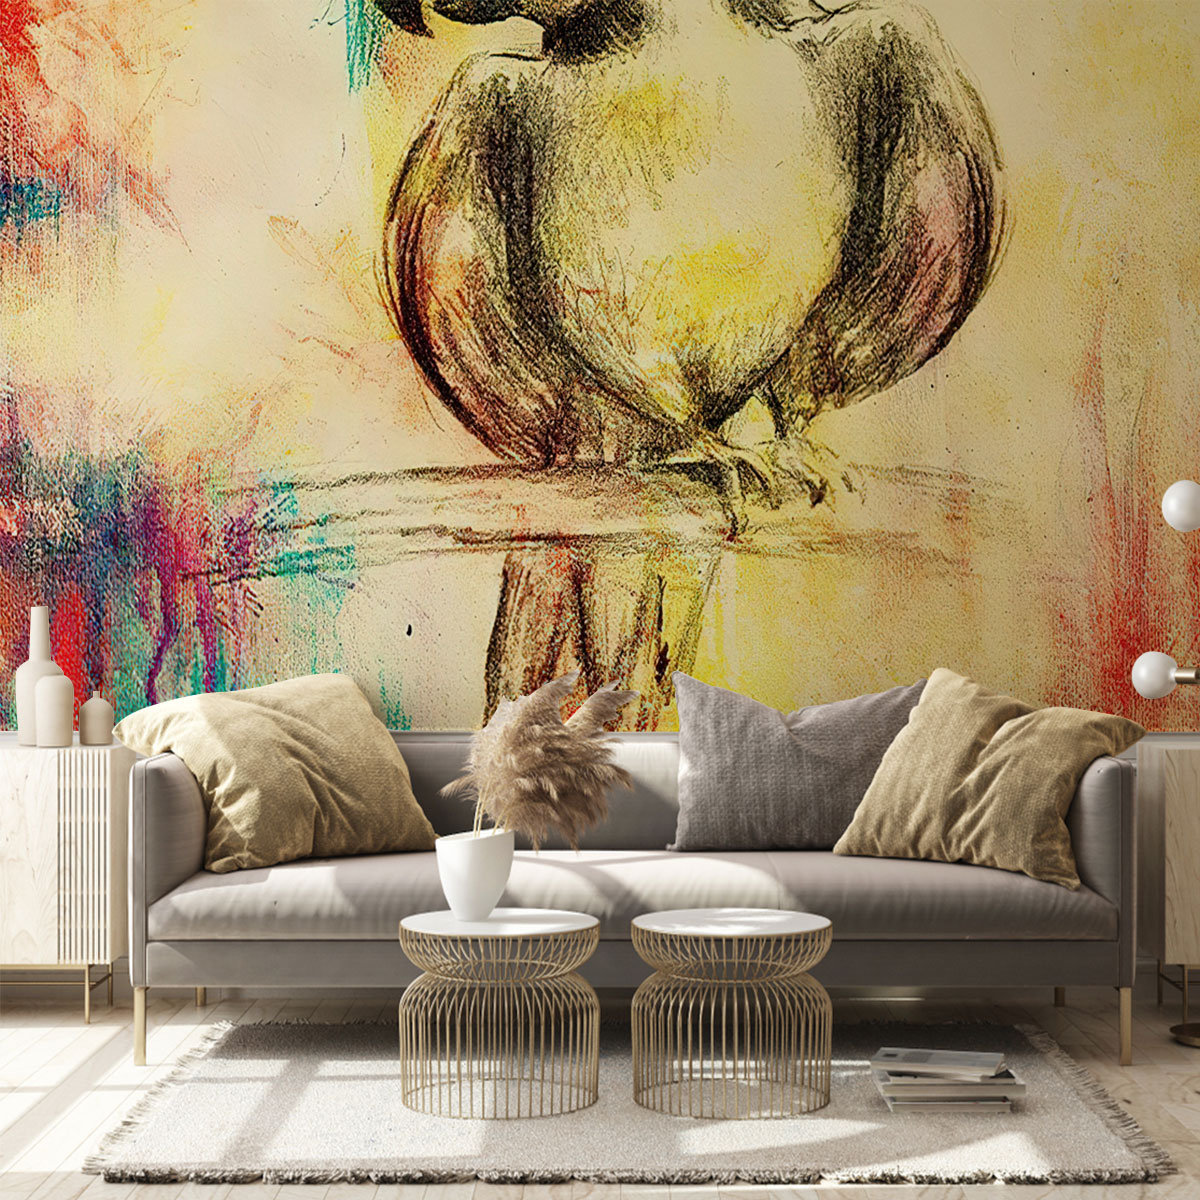 Vintage Colorful Parrot Wall Mural